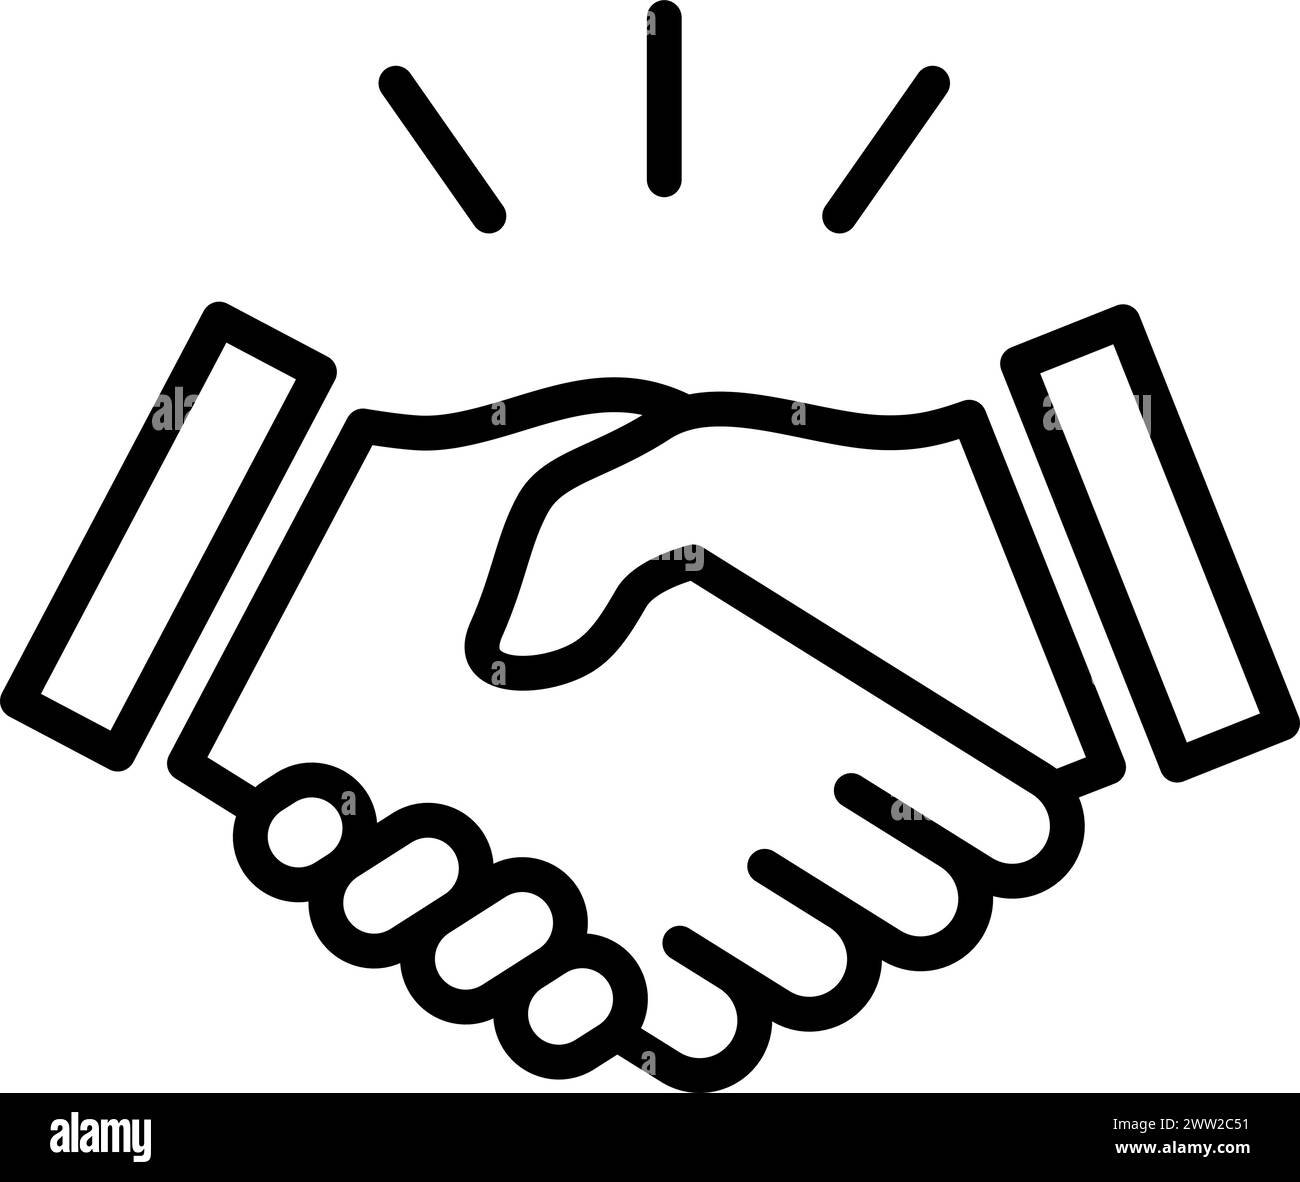 Handshake icon as a concept of business agreement, trust, partnership and support Stock Vector